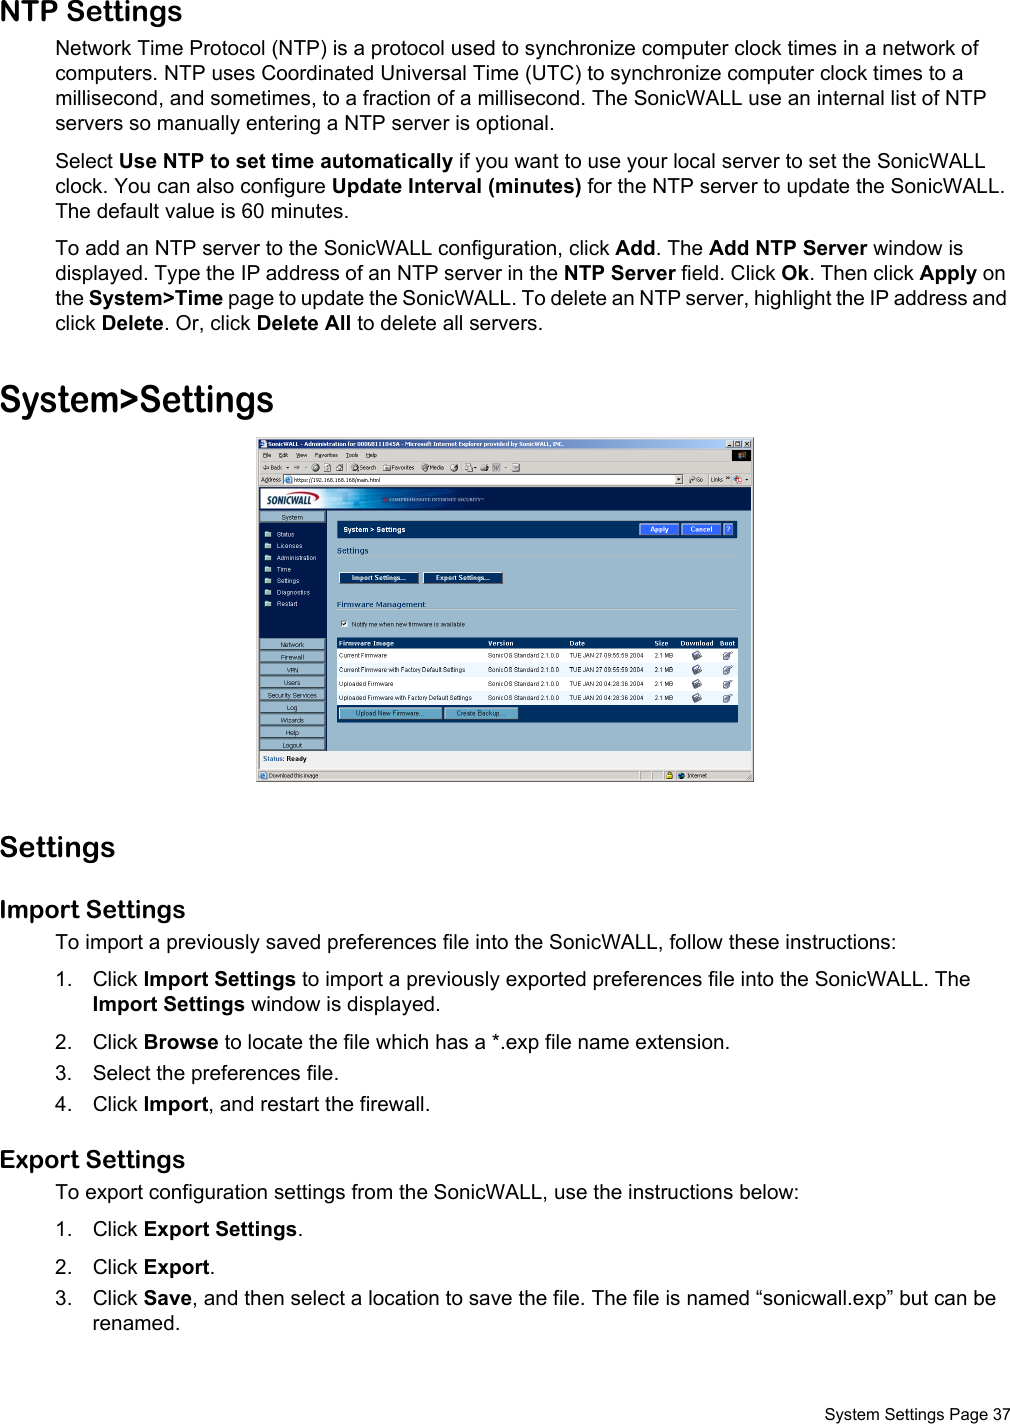  System Settings Page 37NTP SettingsNetwork Time Protocol (NTP) is a protocol used to synchronize computer clock times in a network of computers. NTP uses Coordinated Universal Time (UTC) to synchronize computer clock times to a millisecond, and sometimes, to a fraction of a millisecond. The SonicWALL use an internal list of NTP servers so manually entering a NTP server is optional. Select Use NTP to set time automatically if you want to use your local server to set the SonicWALL clock. You can also configure Update Interval (minutes) for the NTP server to update the SonicWALL. The default value is 60 minutes. To add an NTP server to the SonicWALL configuration, click Add. The Add NTP Server window is displayed. Type the IP address of an NTP server in the NTP Server field. Click Ok. Then click Apply on the System&gt;Time page to update the SonicWALL. To delete an NTP server, highlight the IP address and click Delete. Or, click Delete All to delete all servers.System&gt;SettingsSettingsImport Settings To import a previously saved preferences file into the SonicWALL, follow these instructions:1. Click Import Settings to import a previously exported preferences file into the SonicWALL. The Import Settings window is displayed. 2. Click Browse to locate the file which has a *.exp file name extension. 3. Select the preferences file.4. Click Import, and restart the firewall.Export Settings To export configuration settings from the SonicWALL, use the instructions below:1. Click Export Settings.2. Click Export. 3. Click Save, and then select a location to save the file. The file is named “sonicwall.exp” but can be renamed. 